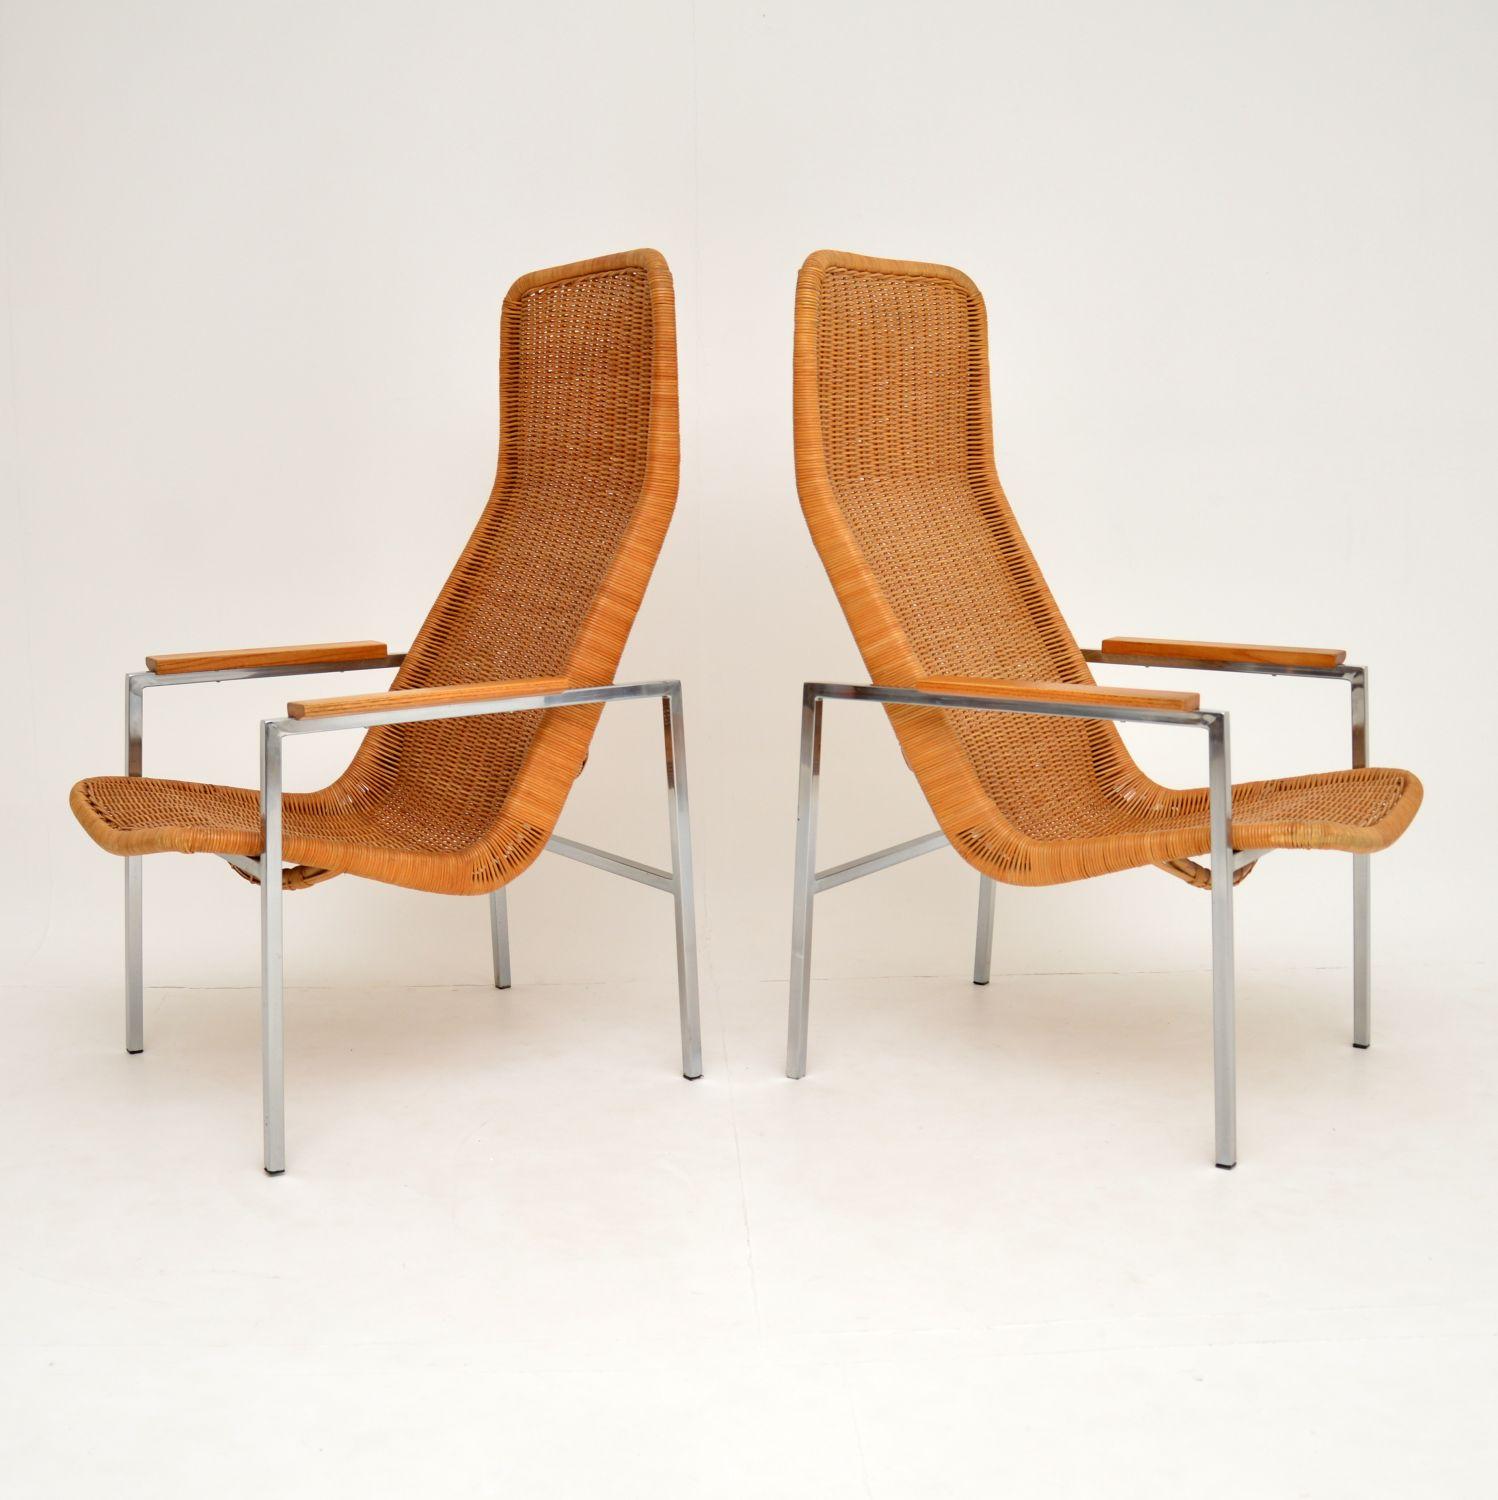 A stunning pair of high back armchairs, made in Holland in the 1960s. These were designed by Dirk Van Sliedrecht, and made by Gebroeders Jonkers.

They are of super quality, and are extremely comfortable. They would be great with sheepskin throws